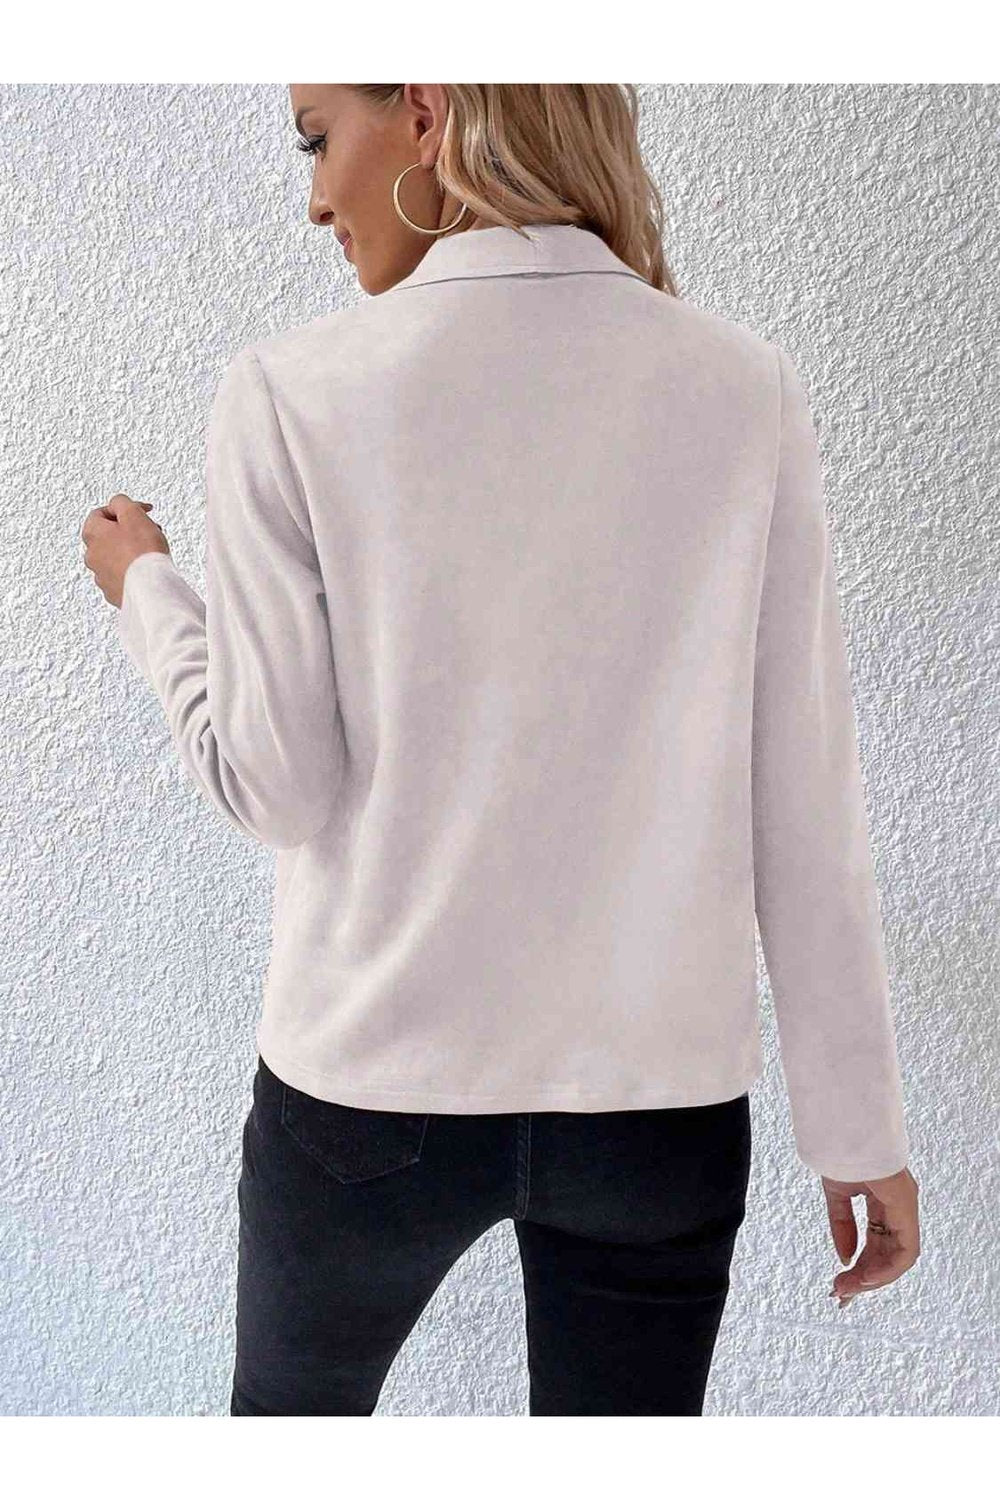 Collared Neck Long Sleeve Jacket - Jackets - FITGGINS